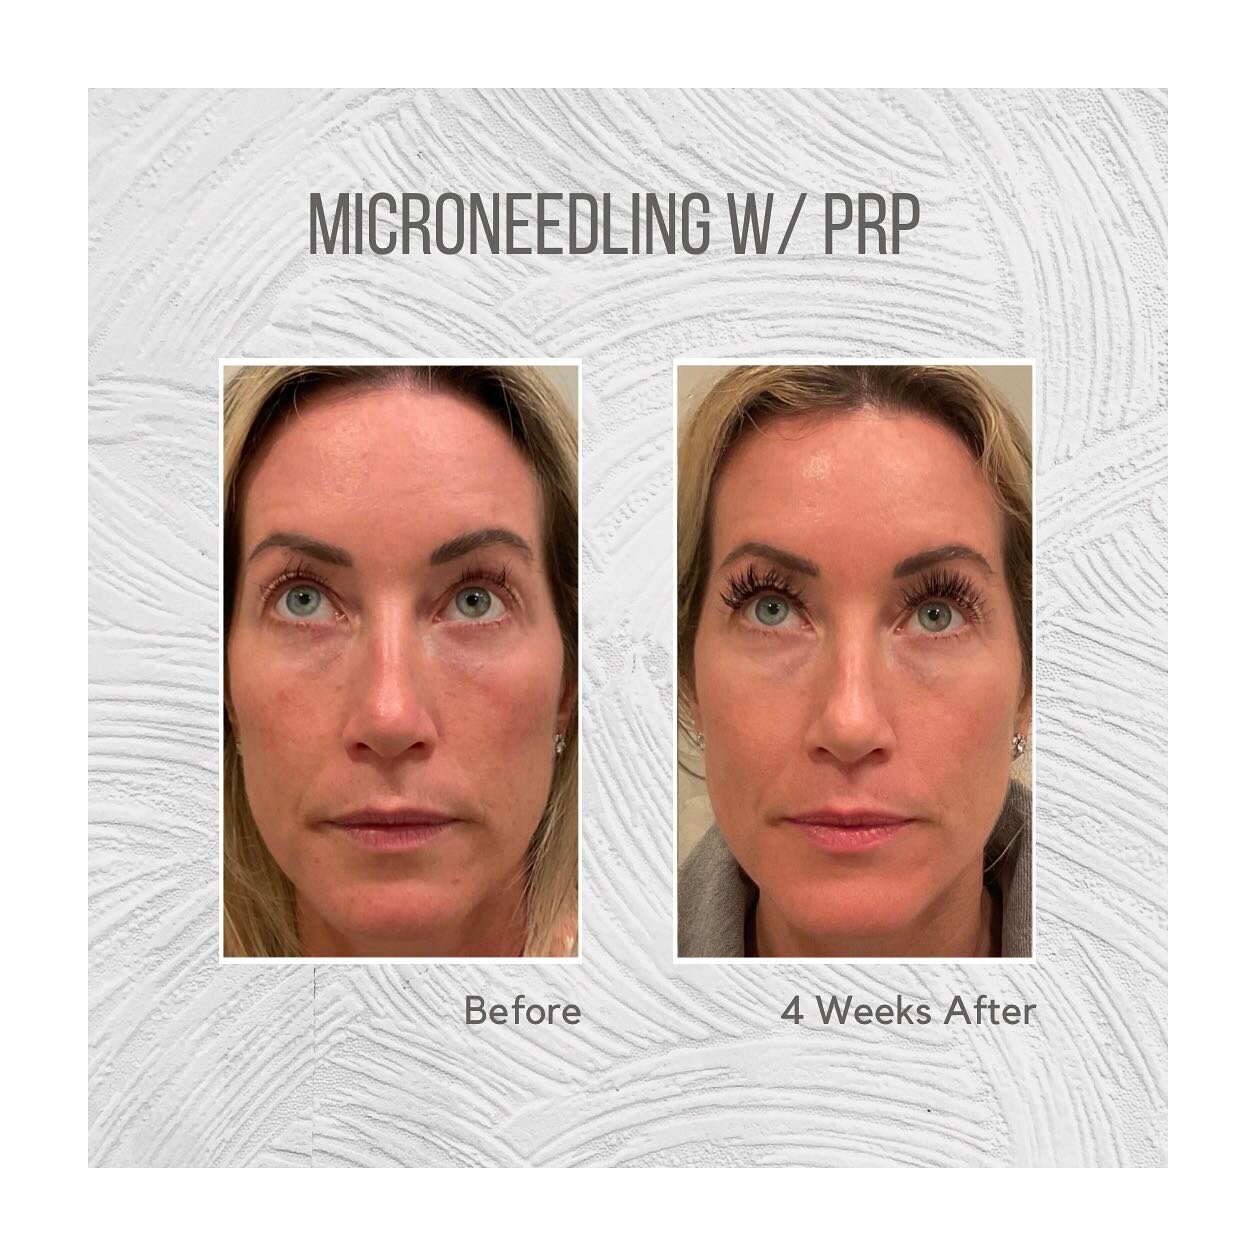 Microneedling May Special 🚨 

👉Save $150 (microneedling w/ PRP regularly $450). Month of May $300

⚡️ The Candela Exceed device offers enhanced treatment versatility as the first dual-indicated, FDA-cleared medical microneedling system for the trea